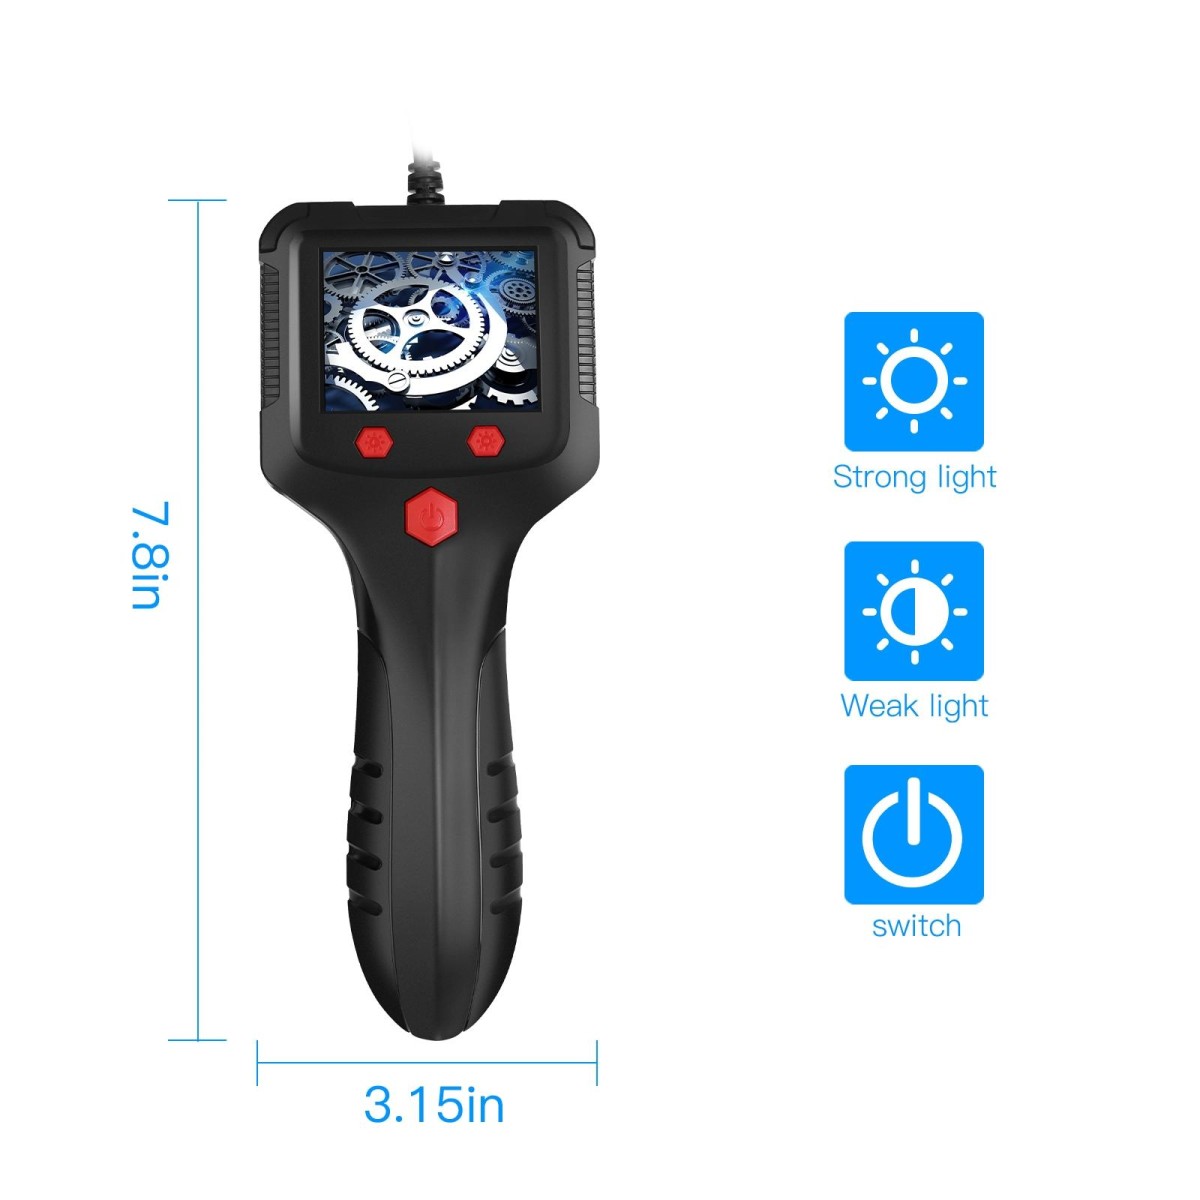 8mm 2.4 inch HD Side Camera Handheld Industrial Endoscope With LCD Screen, Length:2m